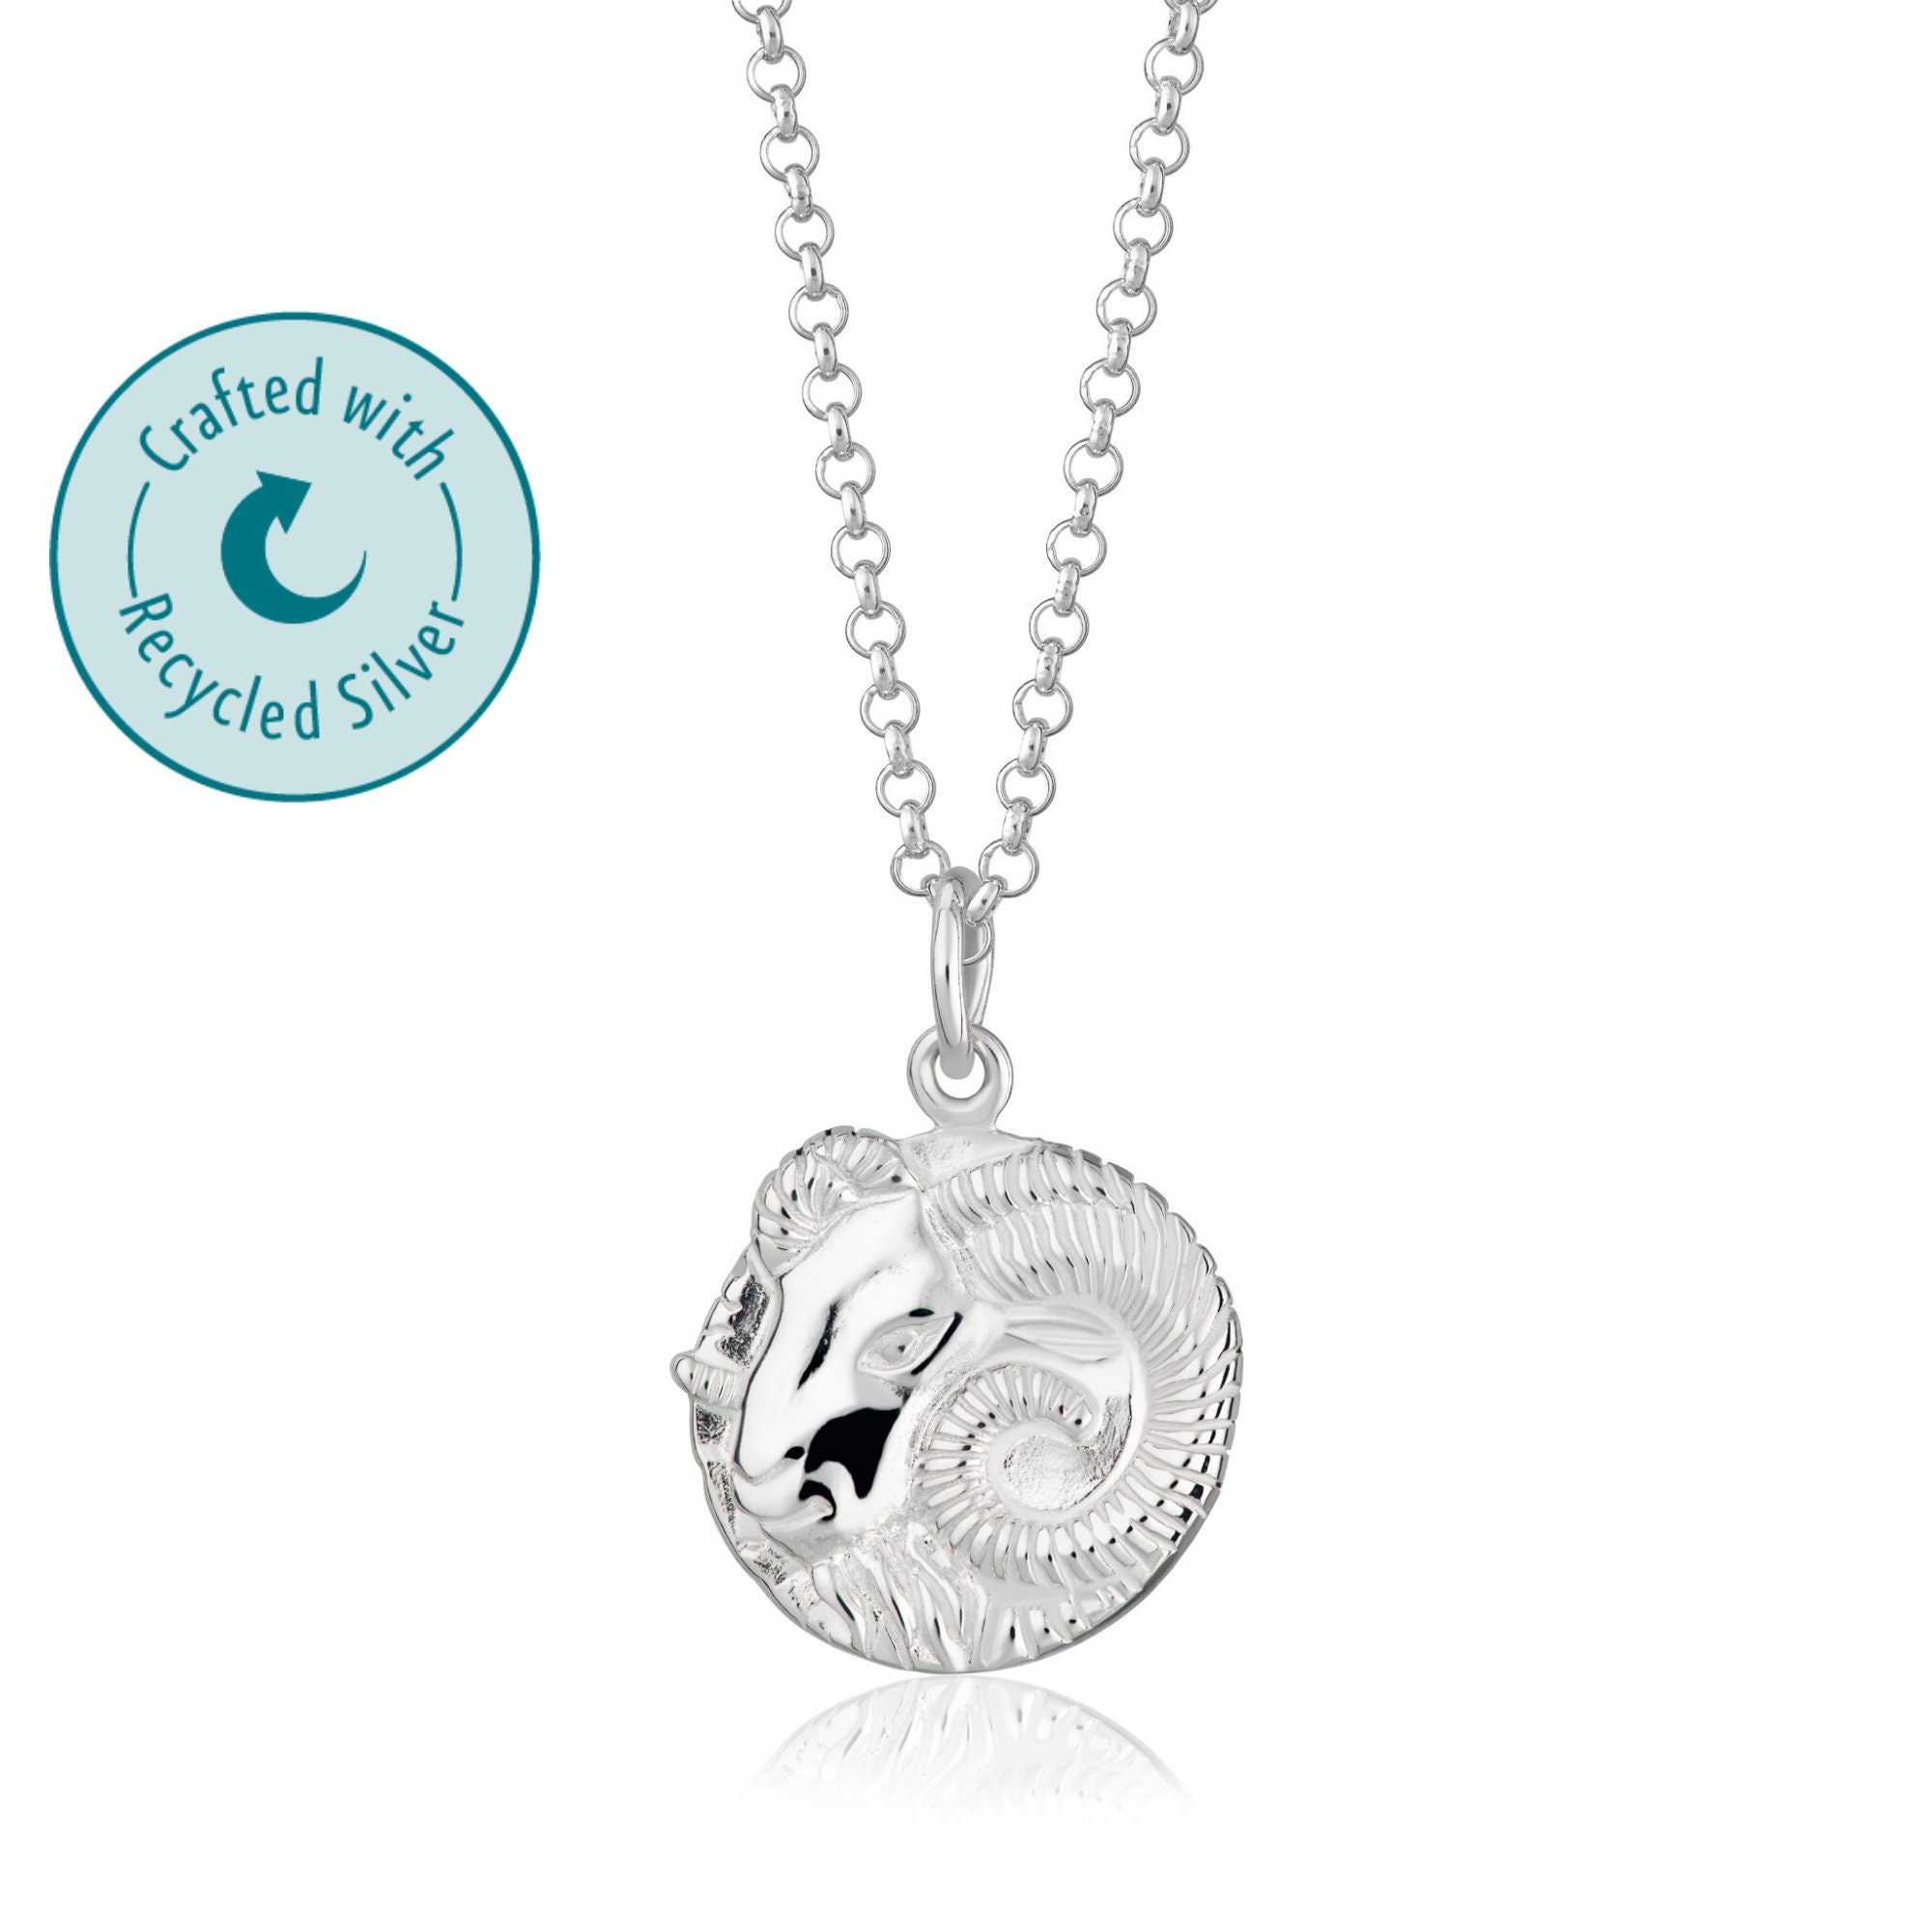 Personalised Silver Aries Zodiac Necklace - Ram Coin Horoscope Star Sign Astrology Pendant Gift